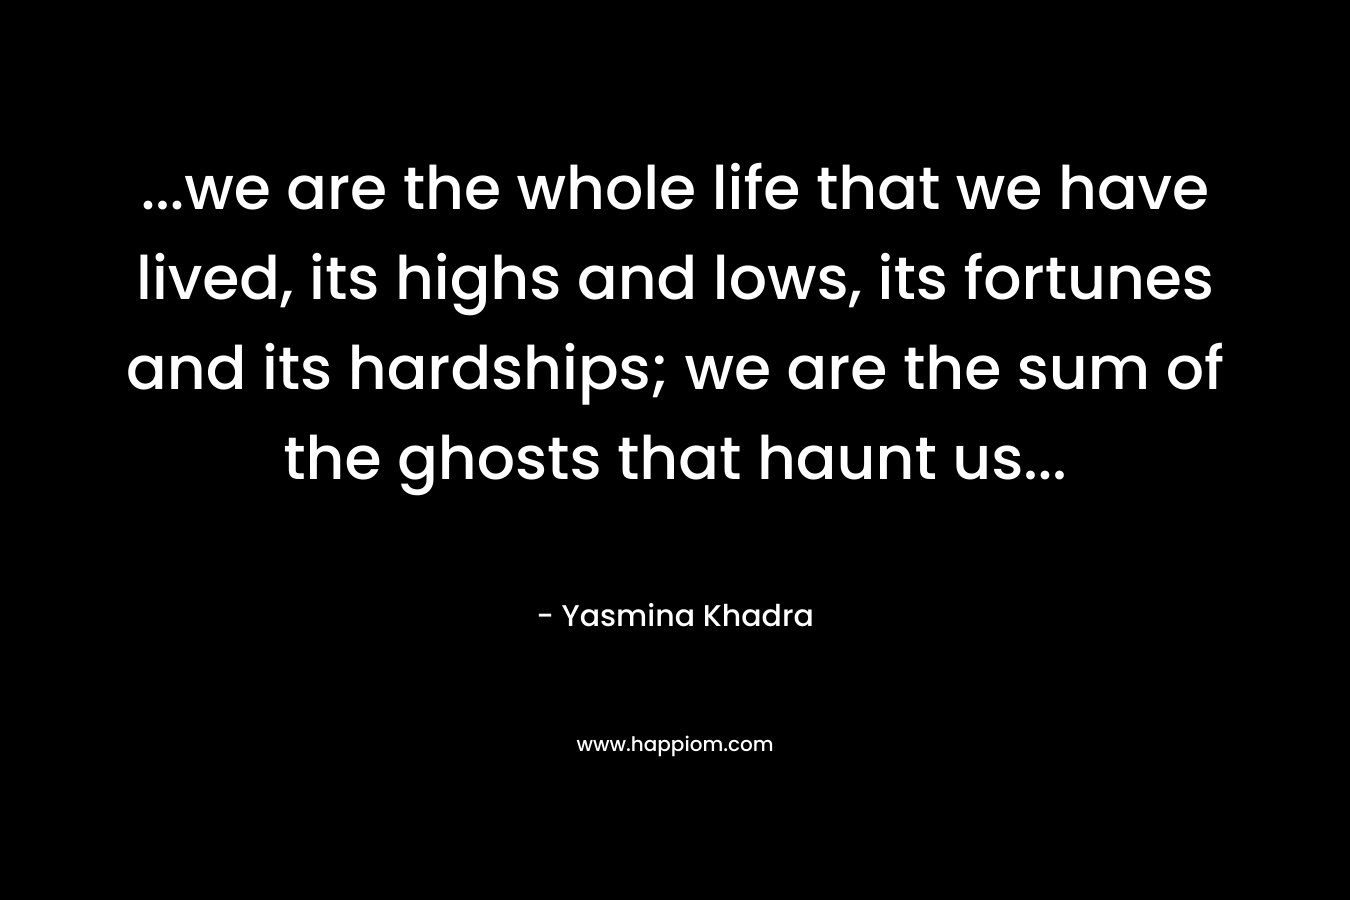 …we are the whole life that we have lived, its highs and lows, its fortunes and its hardships; we are the sum of the ghosts that haunt us… – Yasmina Khadra